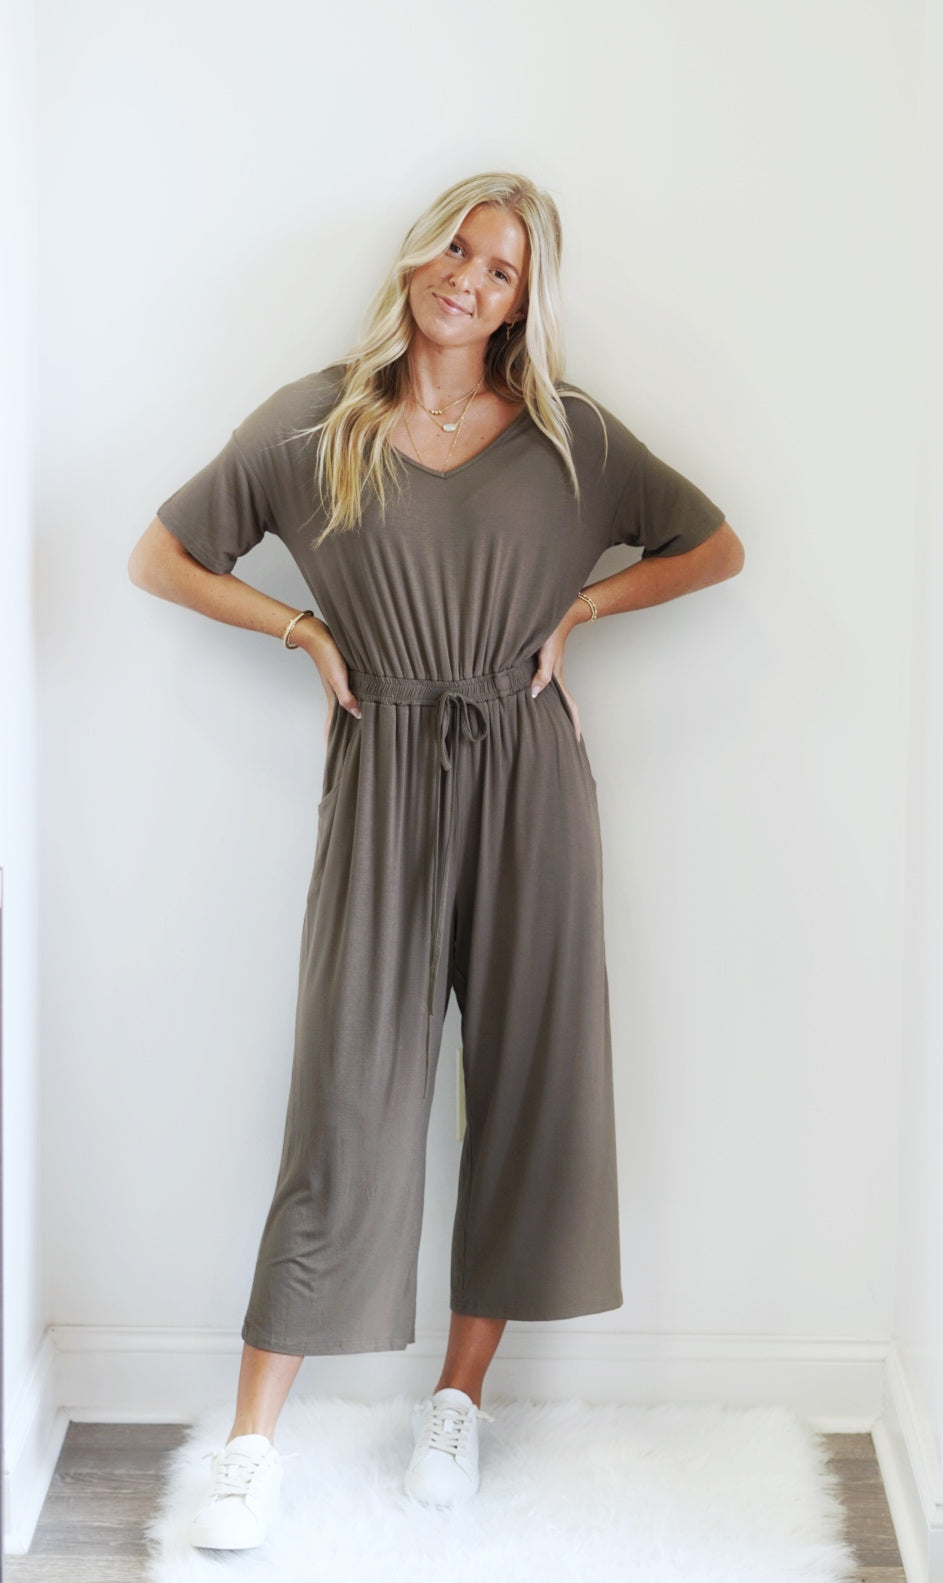 Jersey Dolman Sleeve Jumpsuit  Jumpsuit with sleeves, Plus size